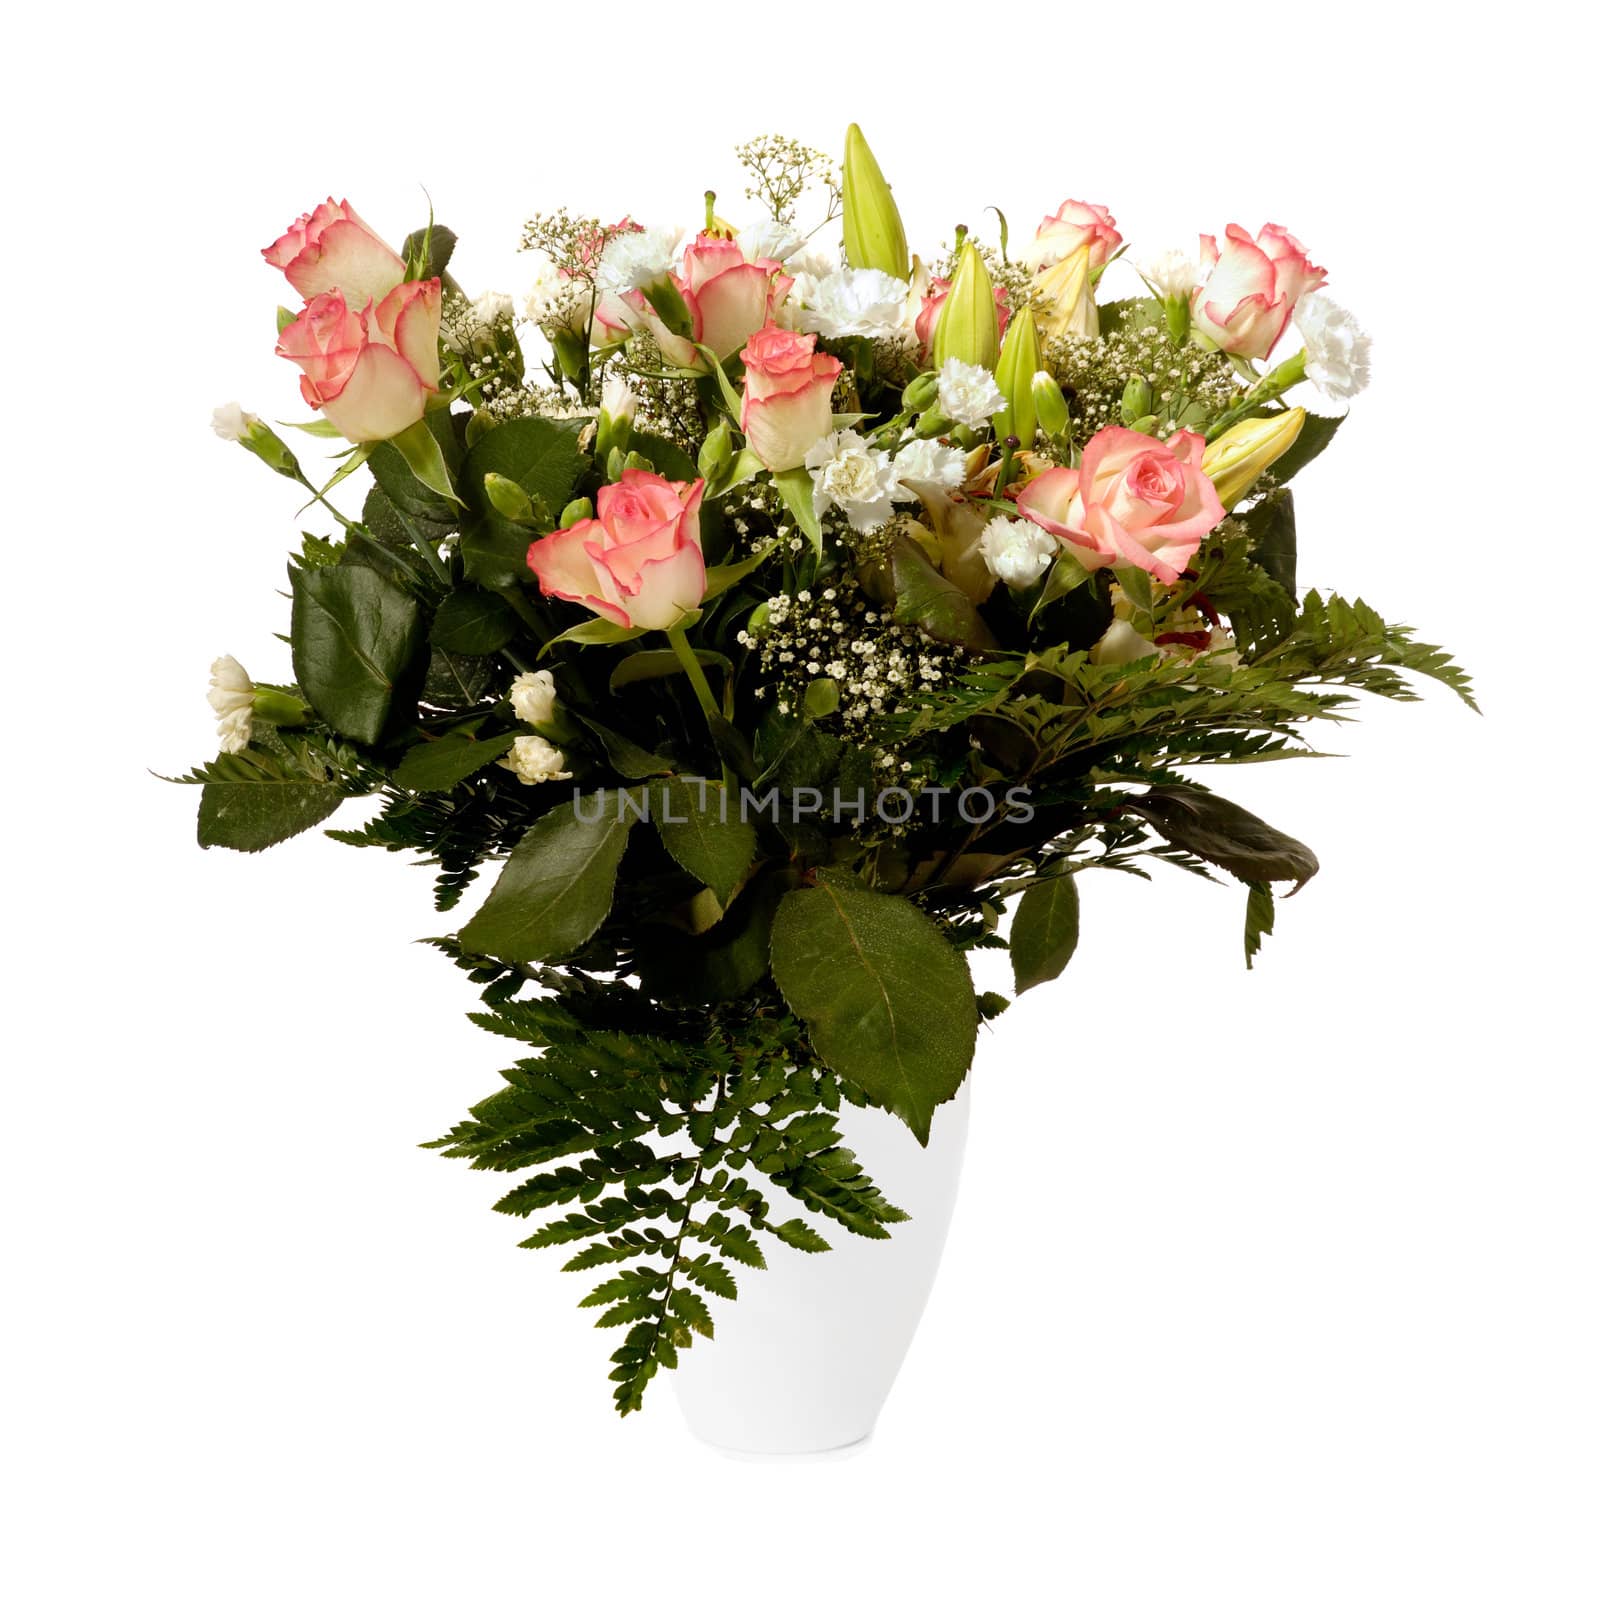 Bouquet of mixed flowers in a vase taken on a white background